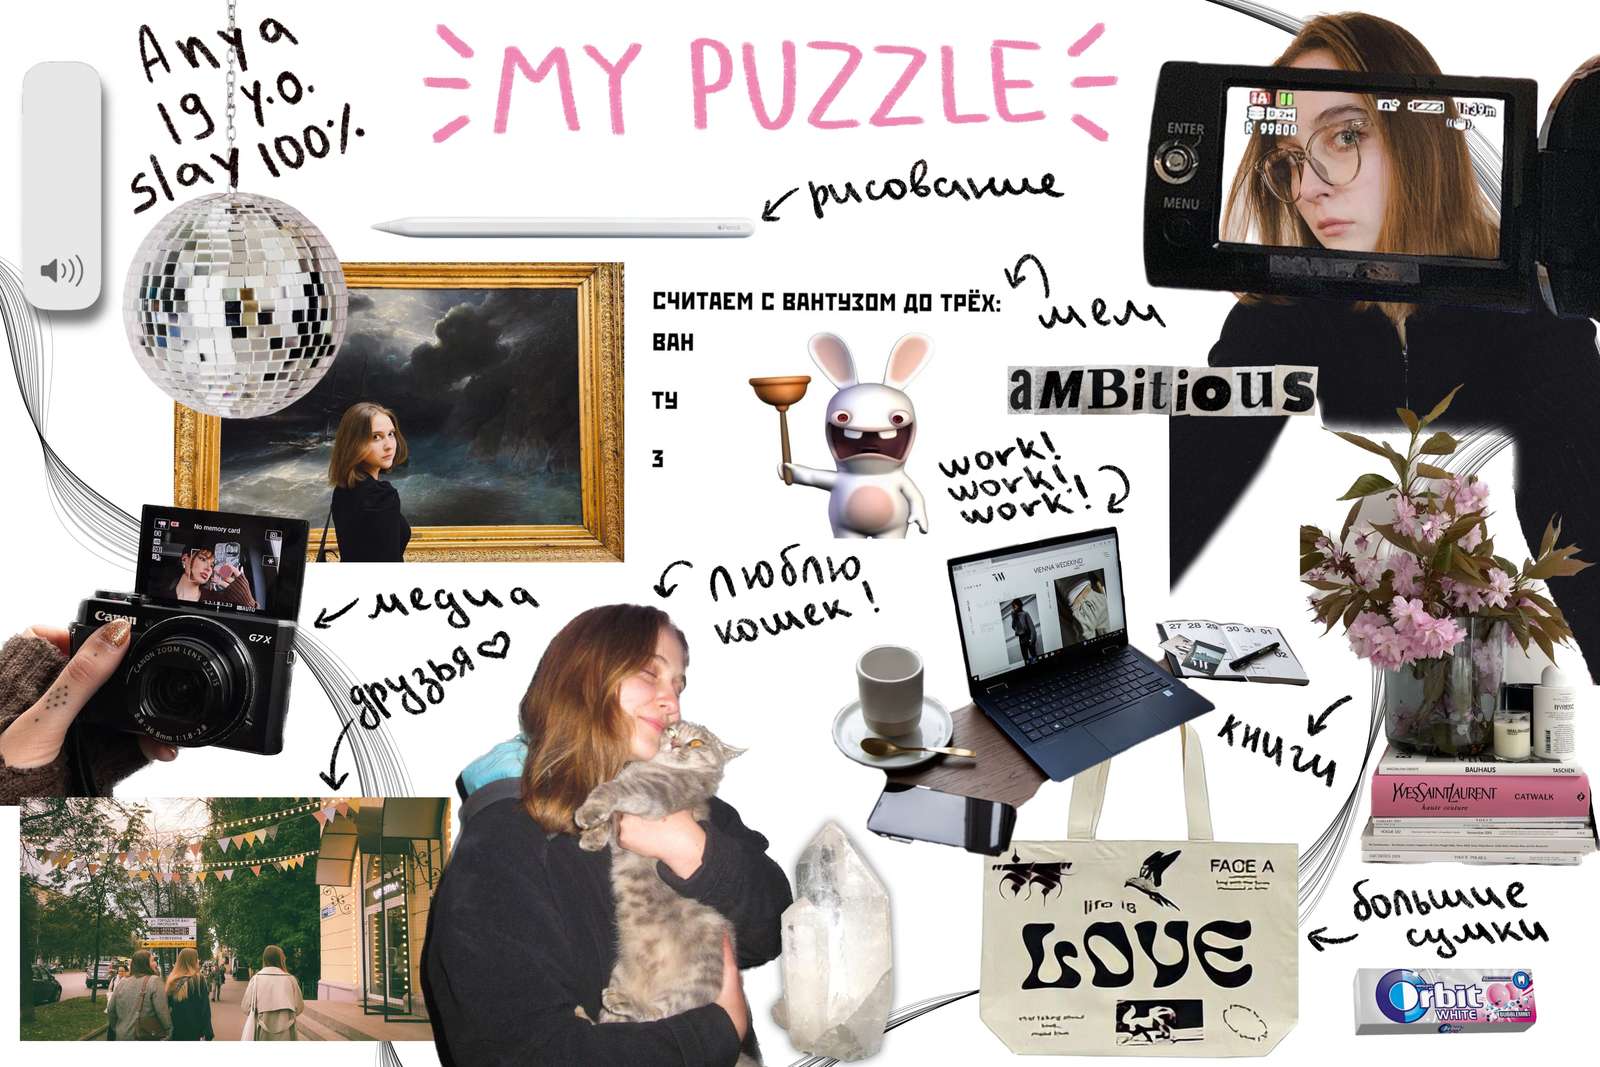 then puzzle online from photo